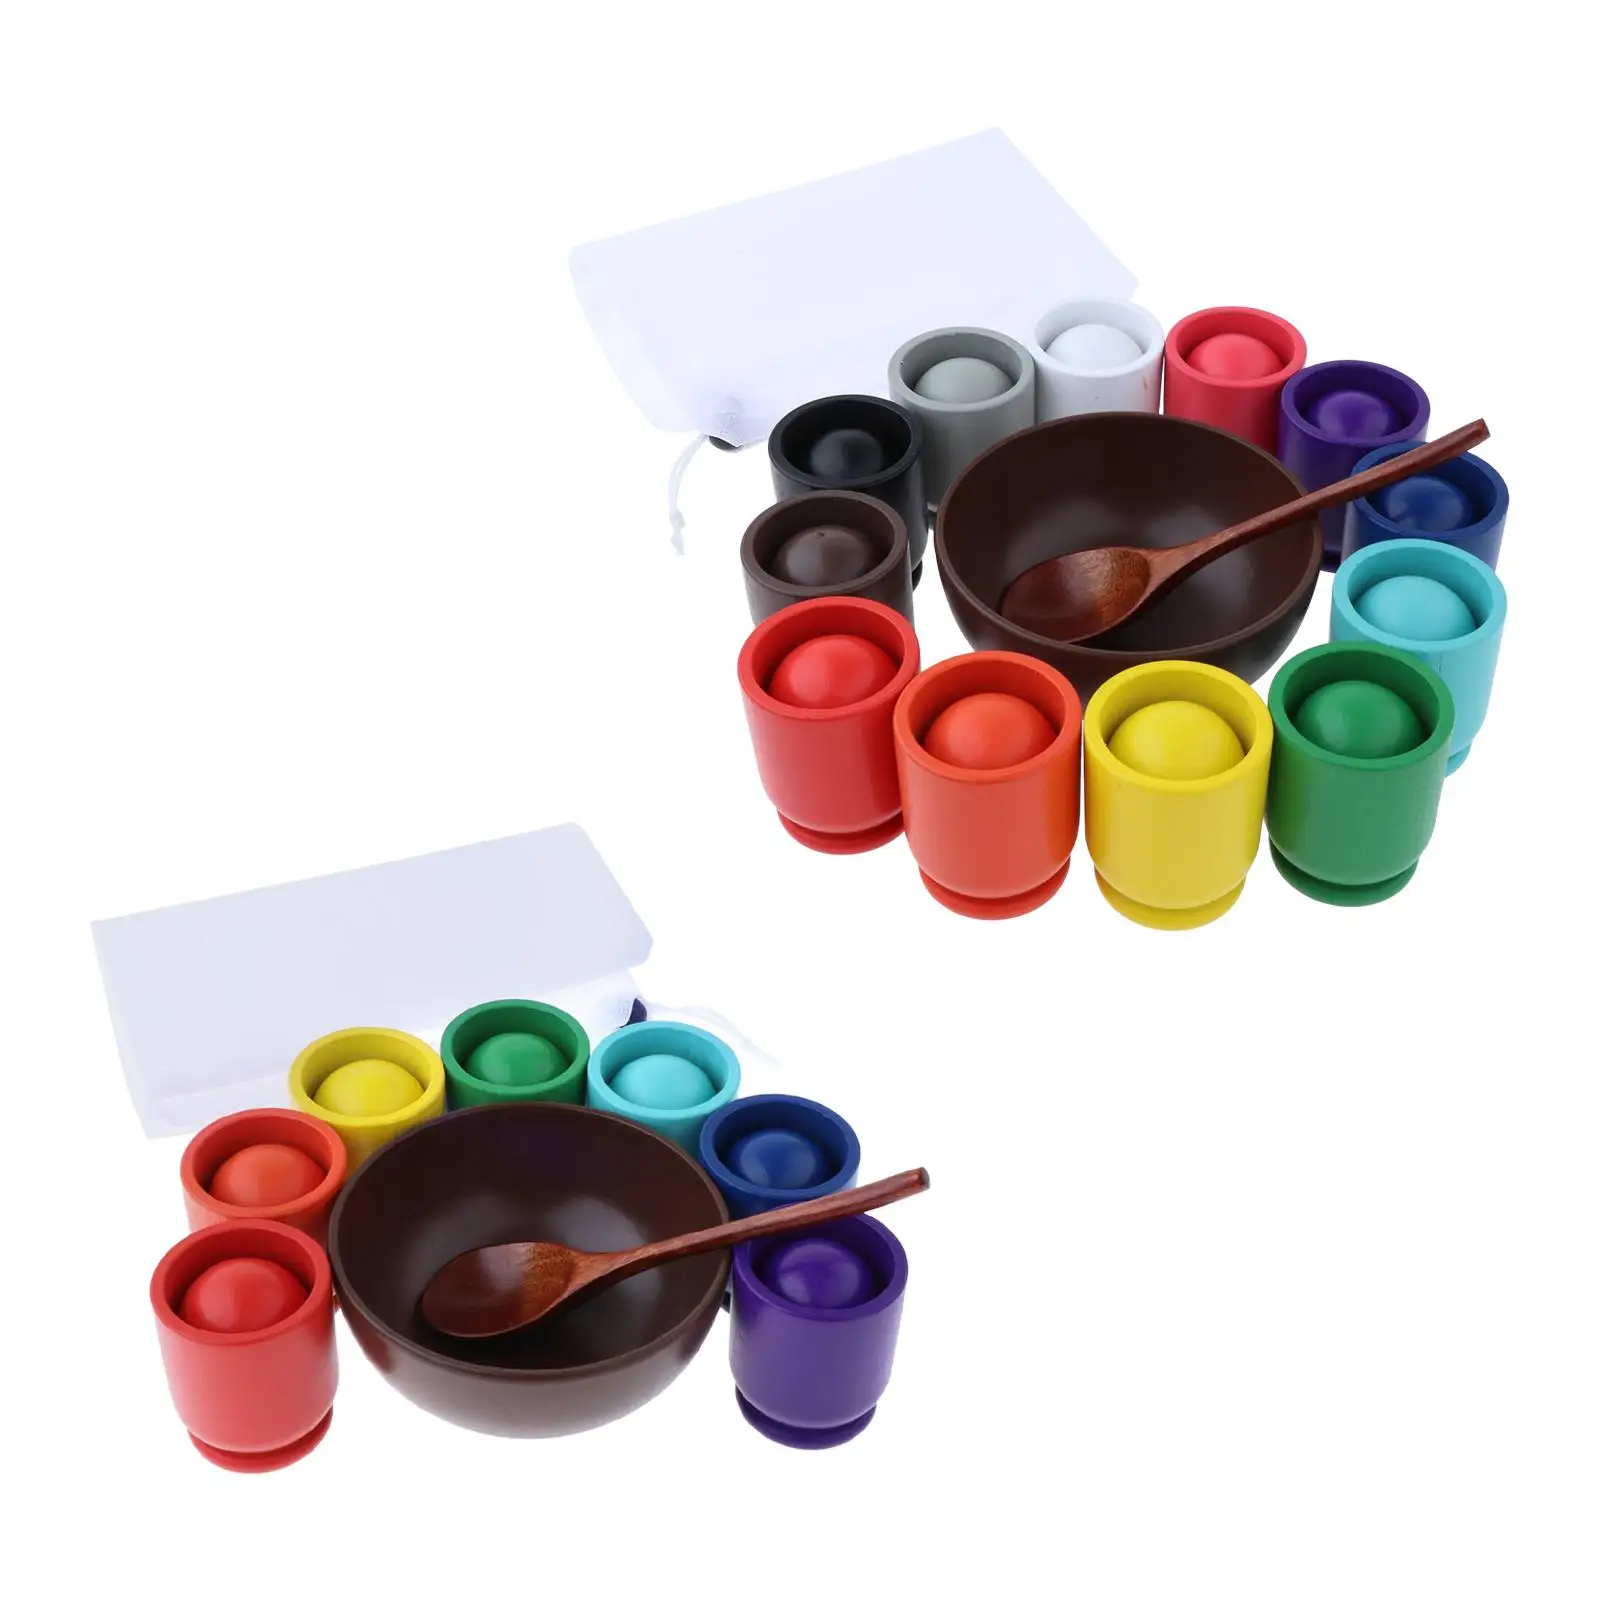 Rainbow Balls in Cups Montessori Toy and Spoon Bowl Motor Skill Exercise Board Game Baby Early Education Toys for Children